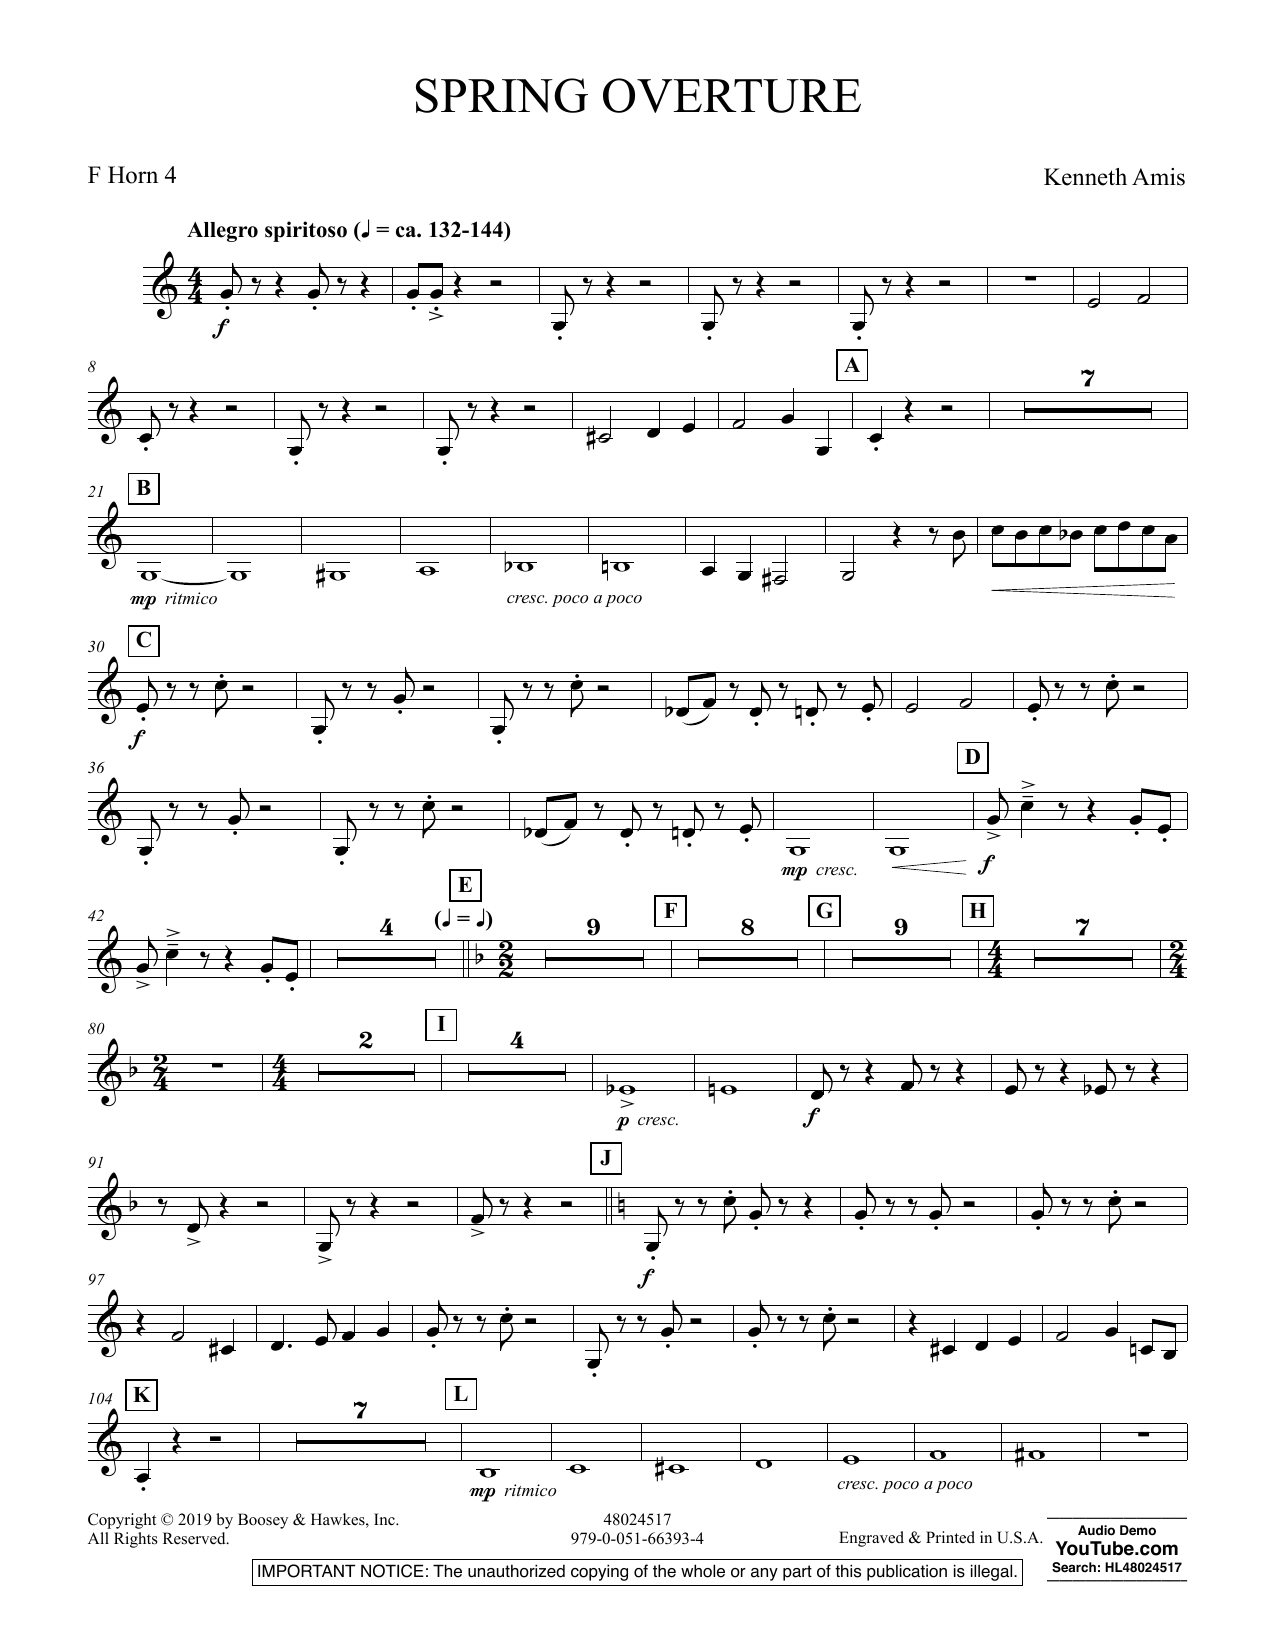 Kenneth Amis Spring Overture - F Horn 4 sheet music preview music notes and score for Concert Band including 2 page(s)